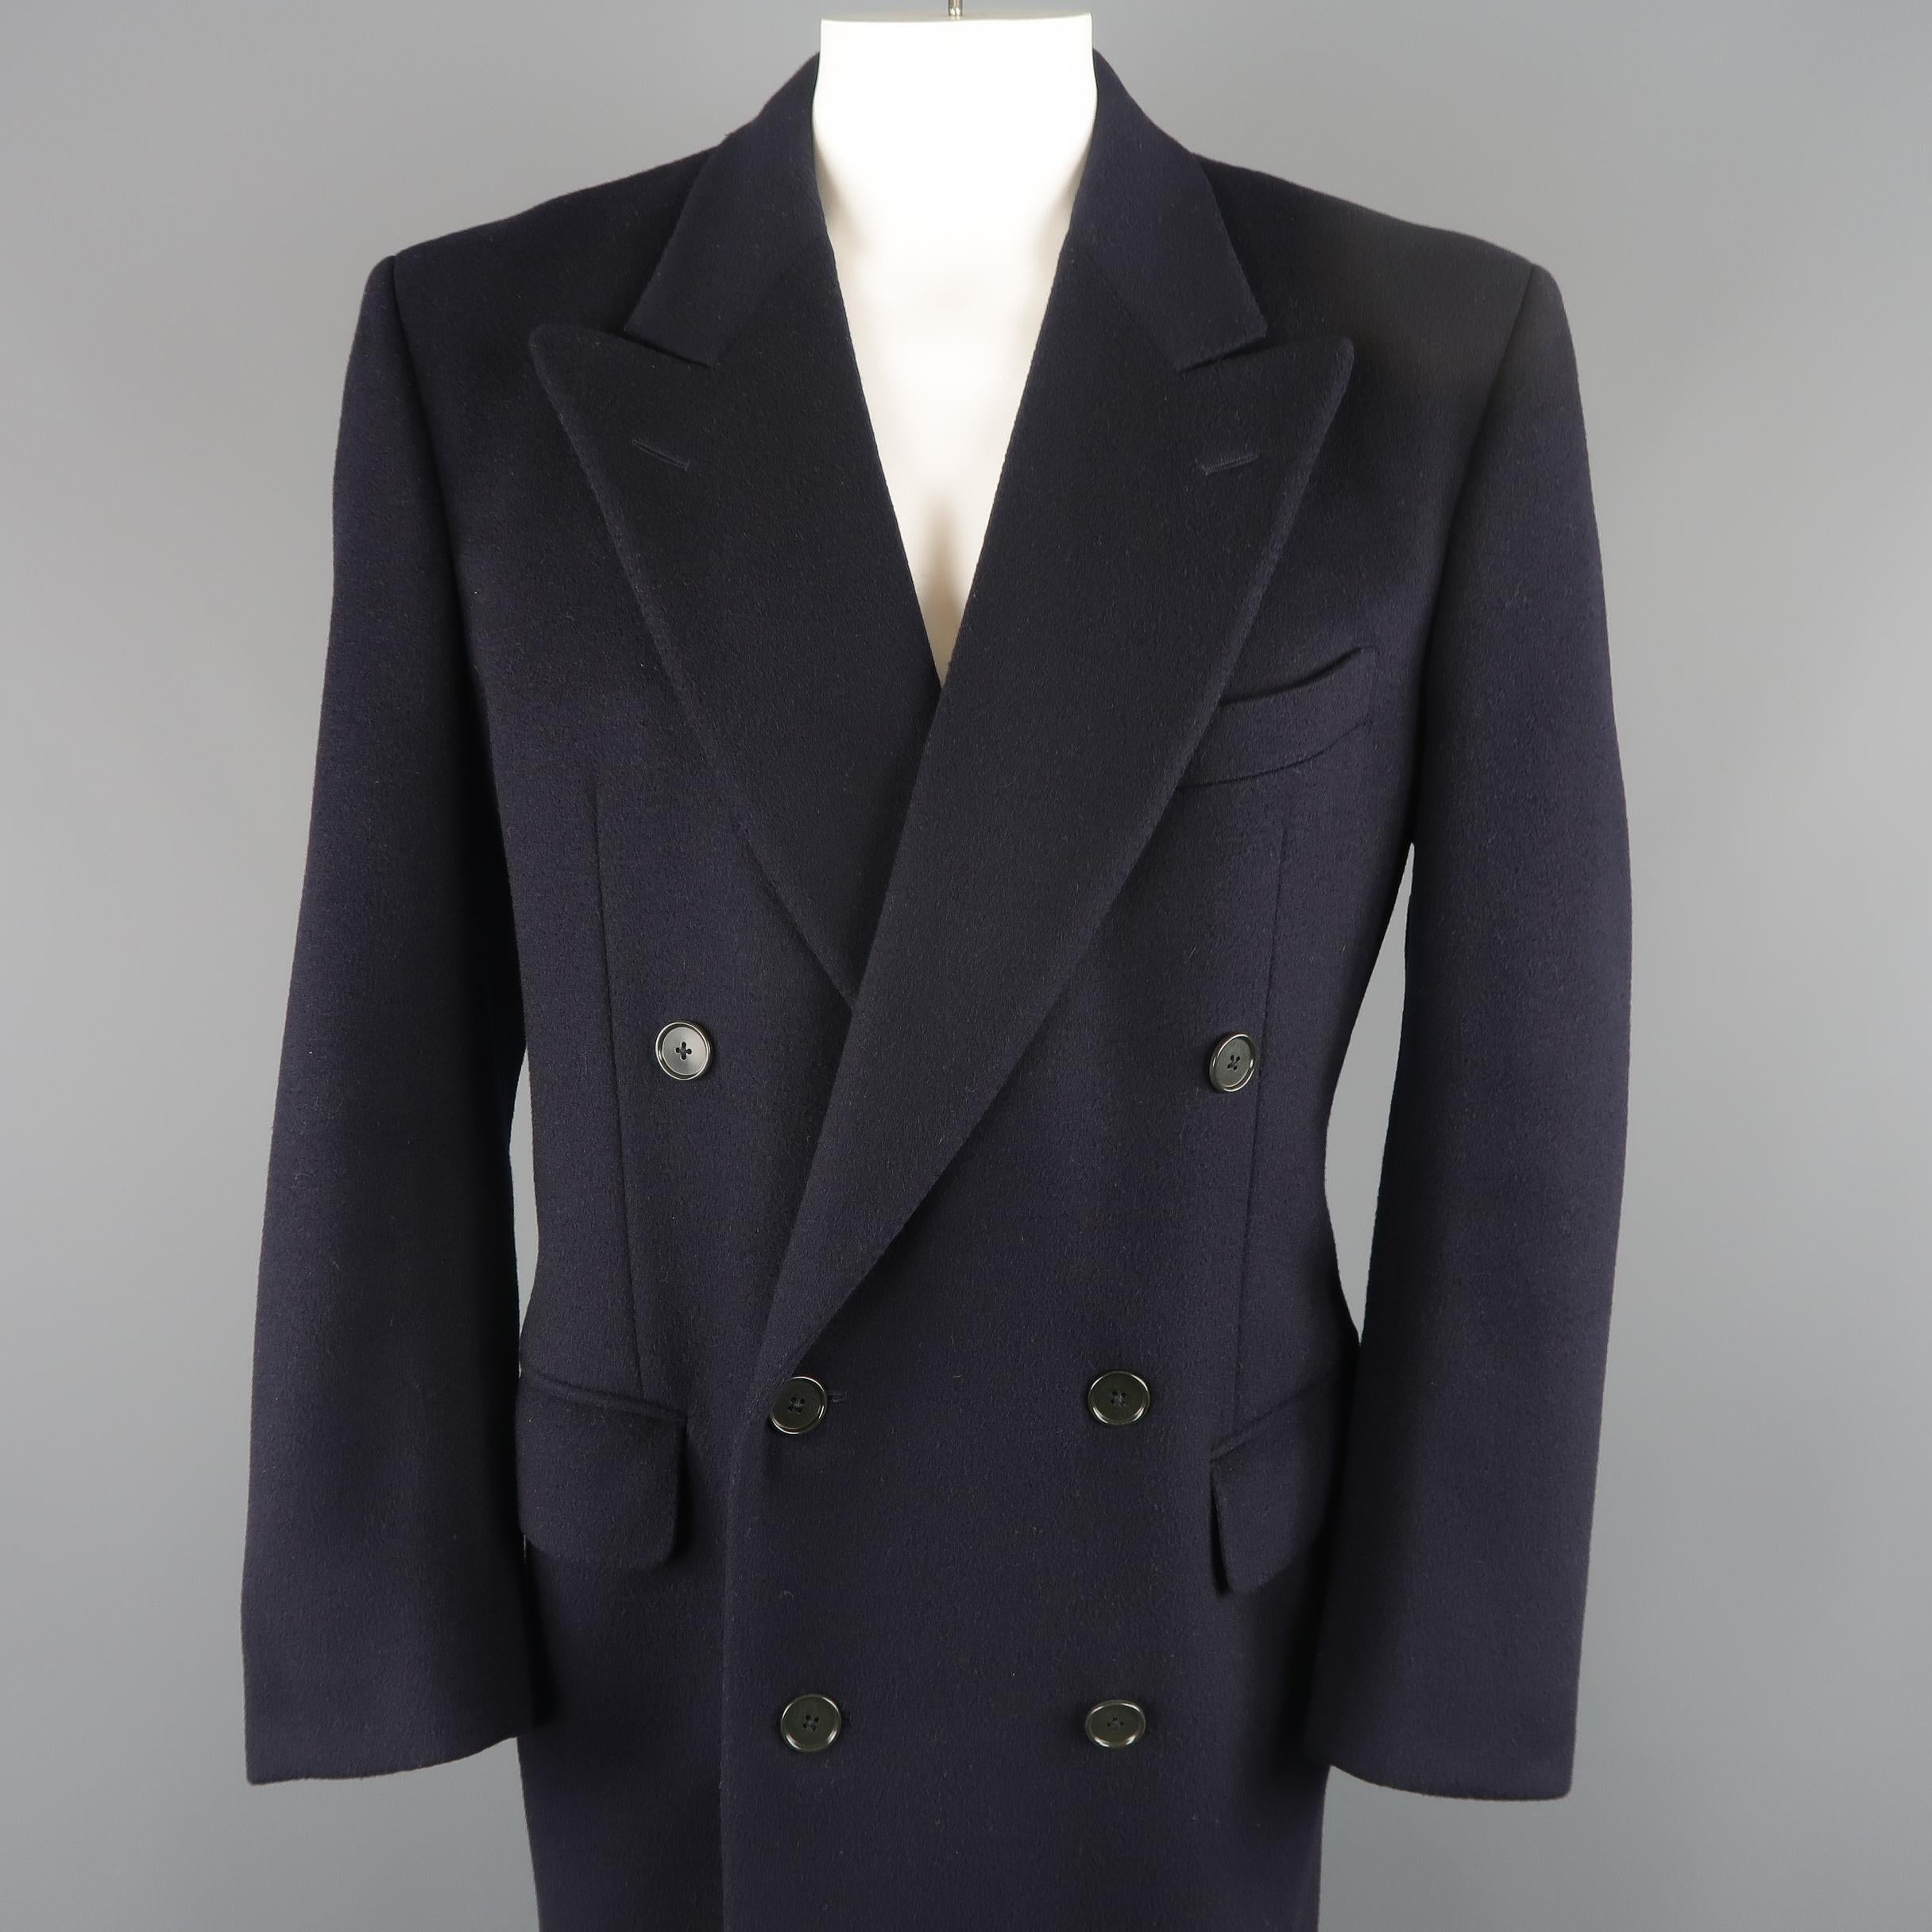 ERMENEGILDO ZEGNA coat comes in a soft wool cashmere blend material with a peak lapel, double breasted closure, flap pockets, and extended hemline. Made in Switzerland.
 
Excellent Pre-Owned Condition.
Marked: IT 52
 
Measurements:
 
Shoulder: 20